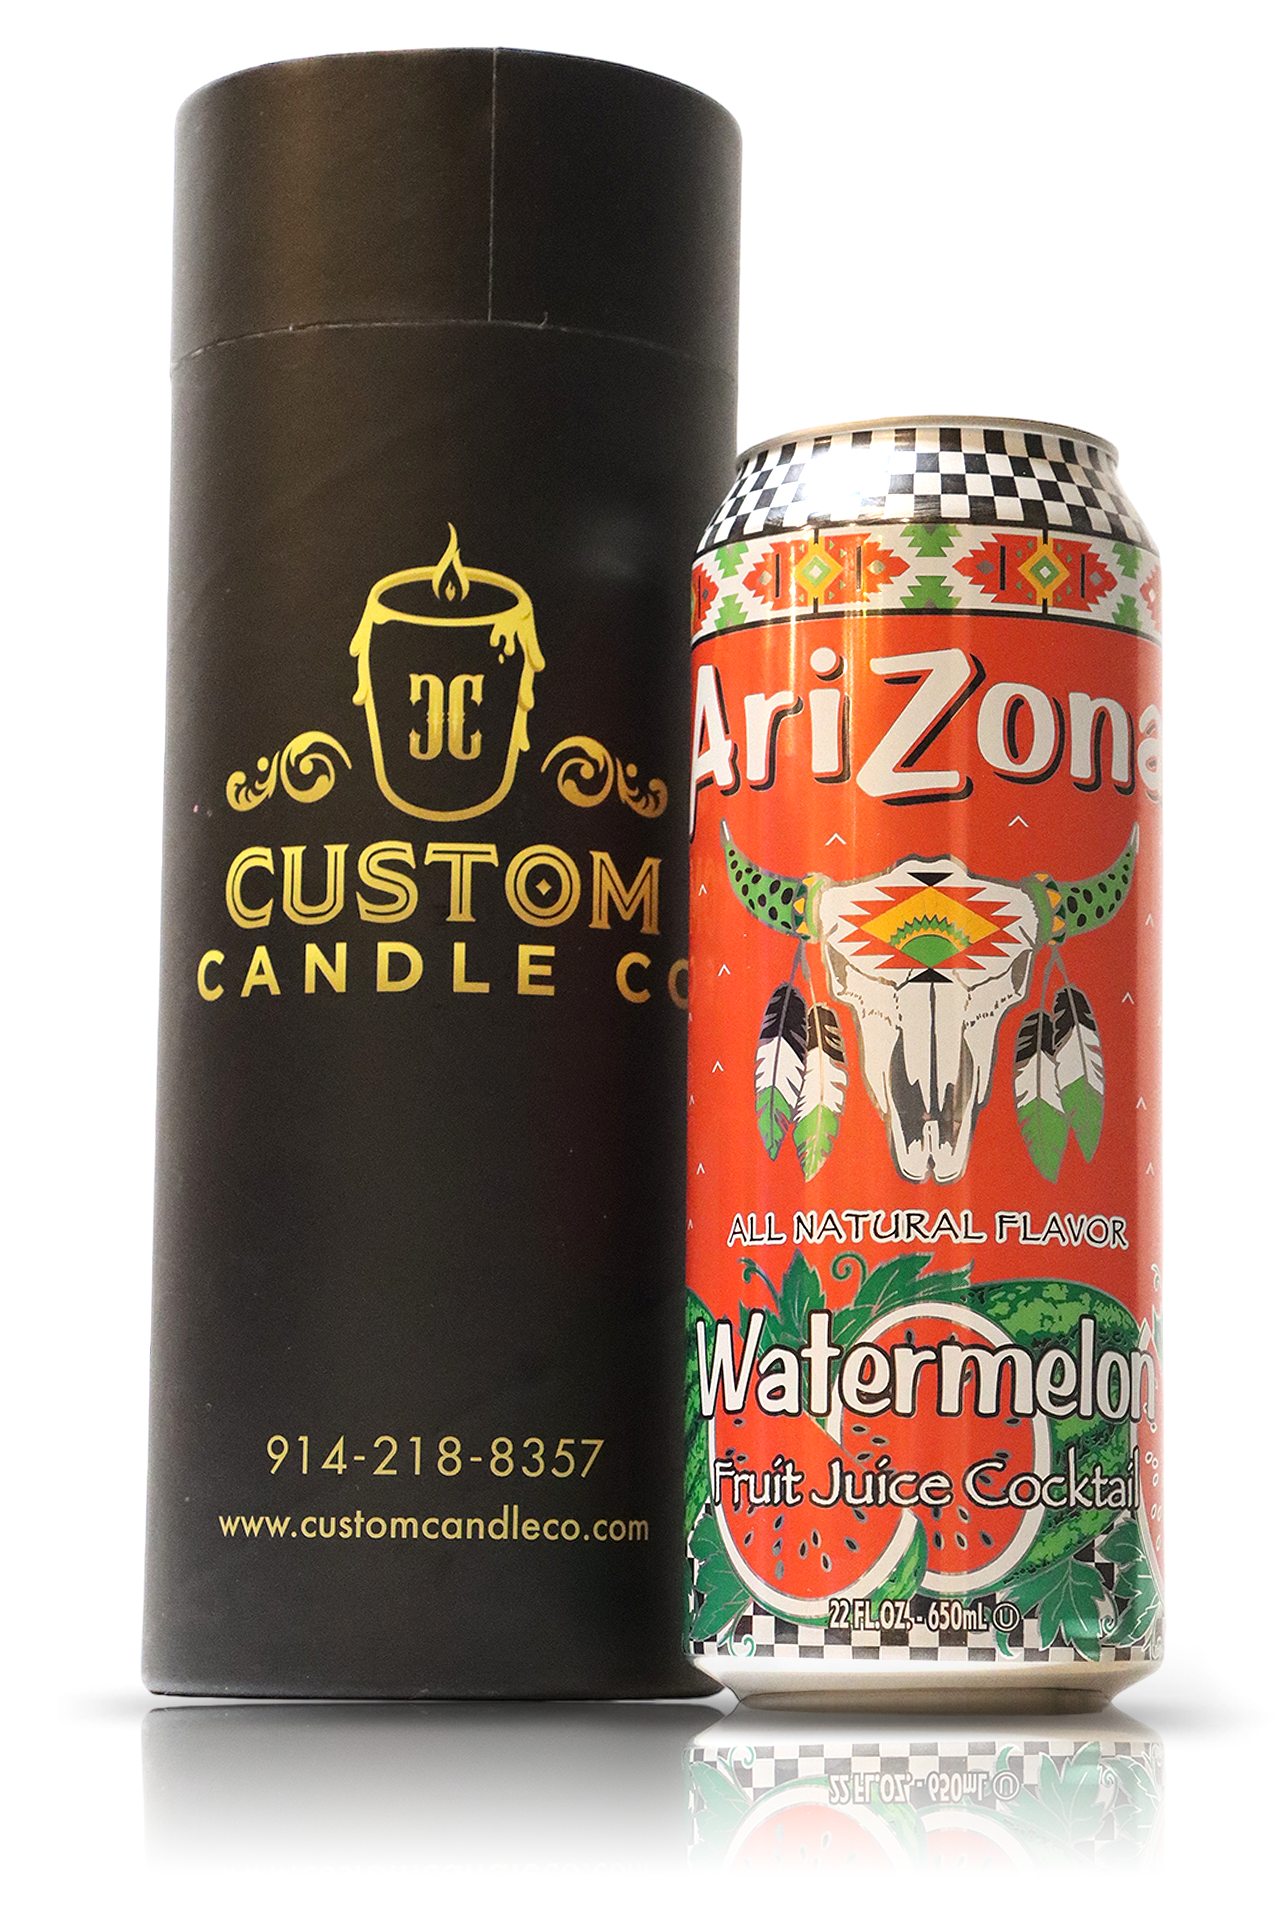 An Arizona Iced Tea Watermelon Candle can with a refreshing watermelon and orange soda blend.